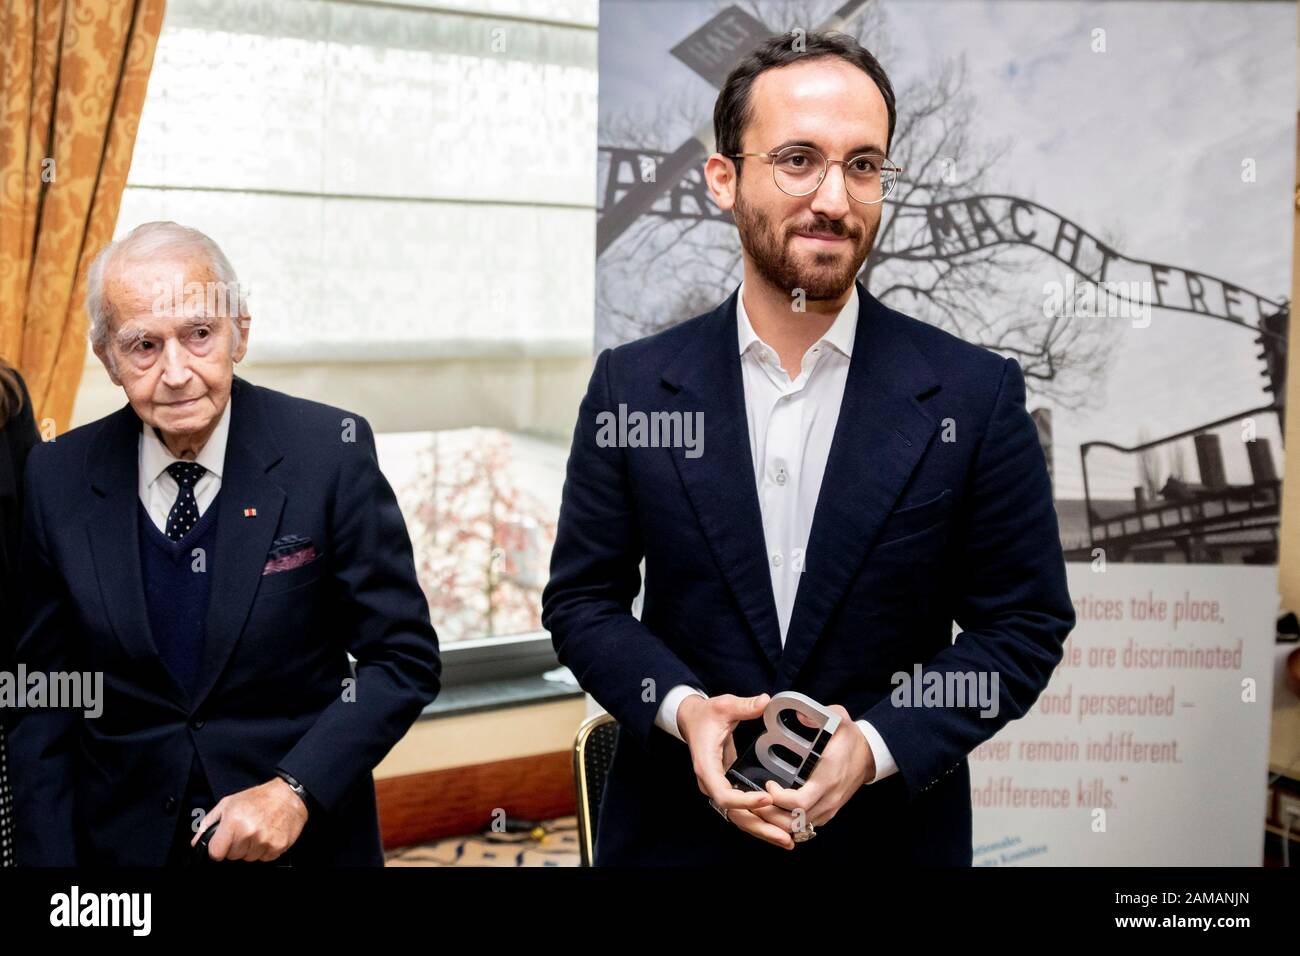 Berlin, Germany. 12th Jan 2020. Igor Levit (r), pianist, and Leon Schwarzbaum, Holocaust survivor, are standing at the Maritim Hotel Berlin when Levit is honored by the International Auschwitz Committee with the statue 'B' as 'Gift of Memory'. Levit was awarded for his commitment against anti-Semitism and right-wing extremism. The statue is modelled on the letter 'B' in the lettering 'ARBEIT MACHT FREI' above the Auschwitz gate, which the prisoners in Auschwitz had secretly turned upside down when they had to manufacture the sign for the SS. Credit: dpa picture alliance/Alamy Live News Stock Photo